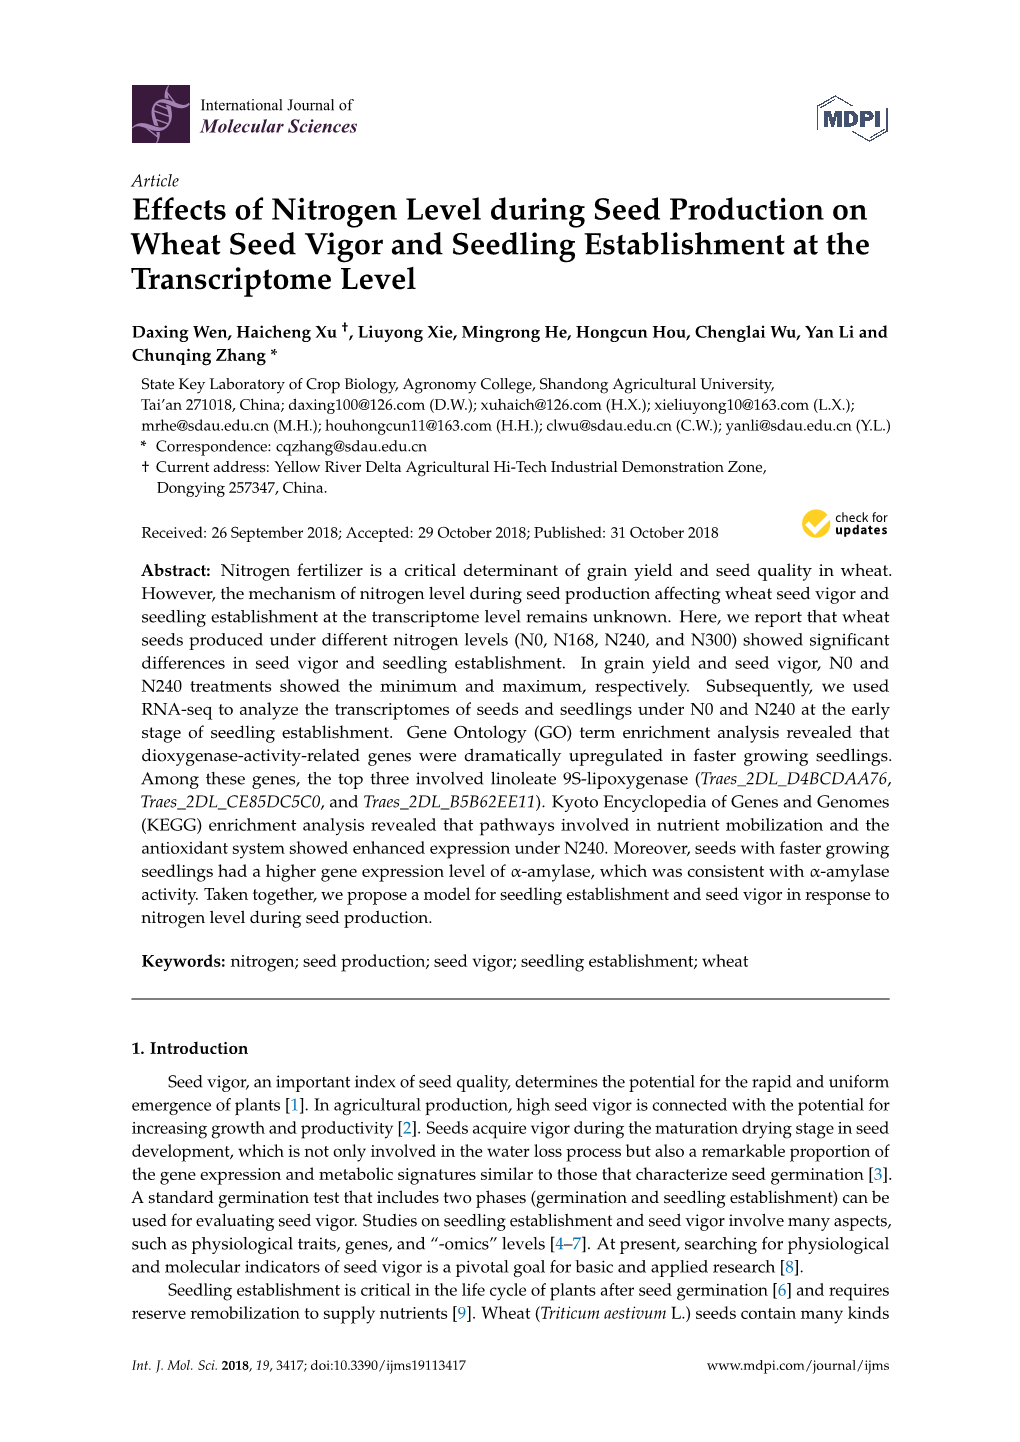 Effects of Nitrogen Level During Seed Production on Wheat Seed Vigor and Seedling Establishment at the Transcriptome Level